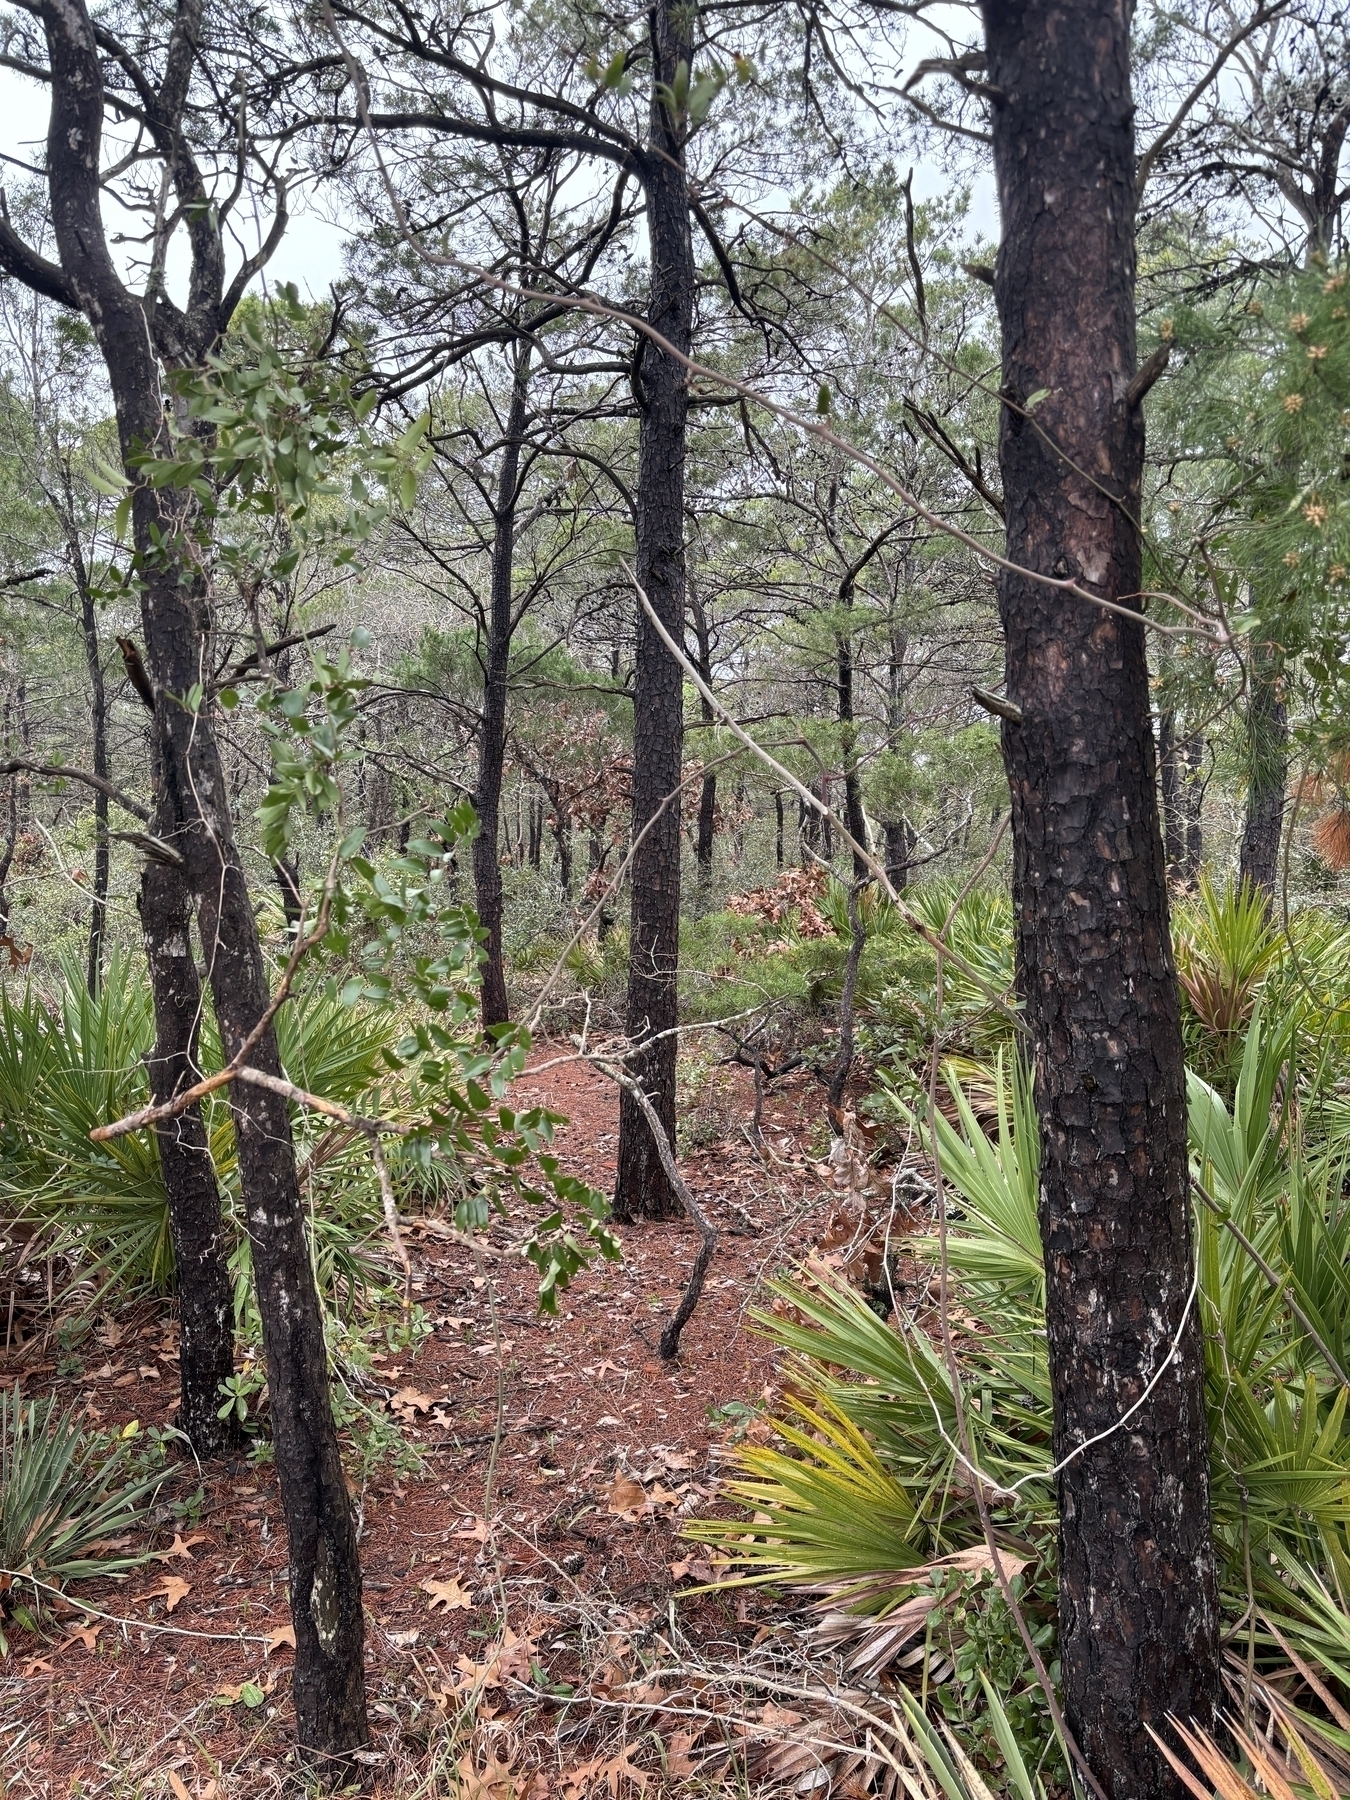 A snapshot of a Florida pine stand from a hike we took in Panama City Beach, FL